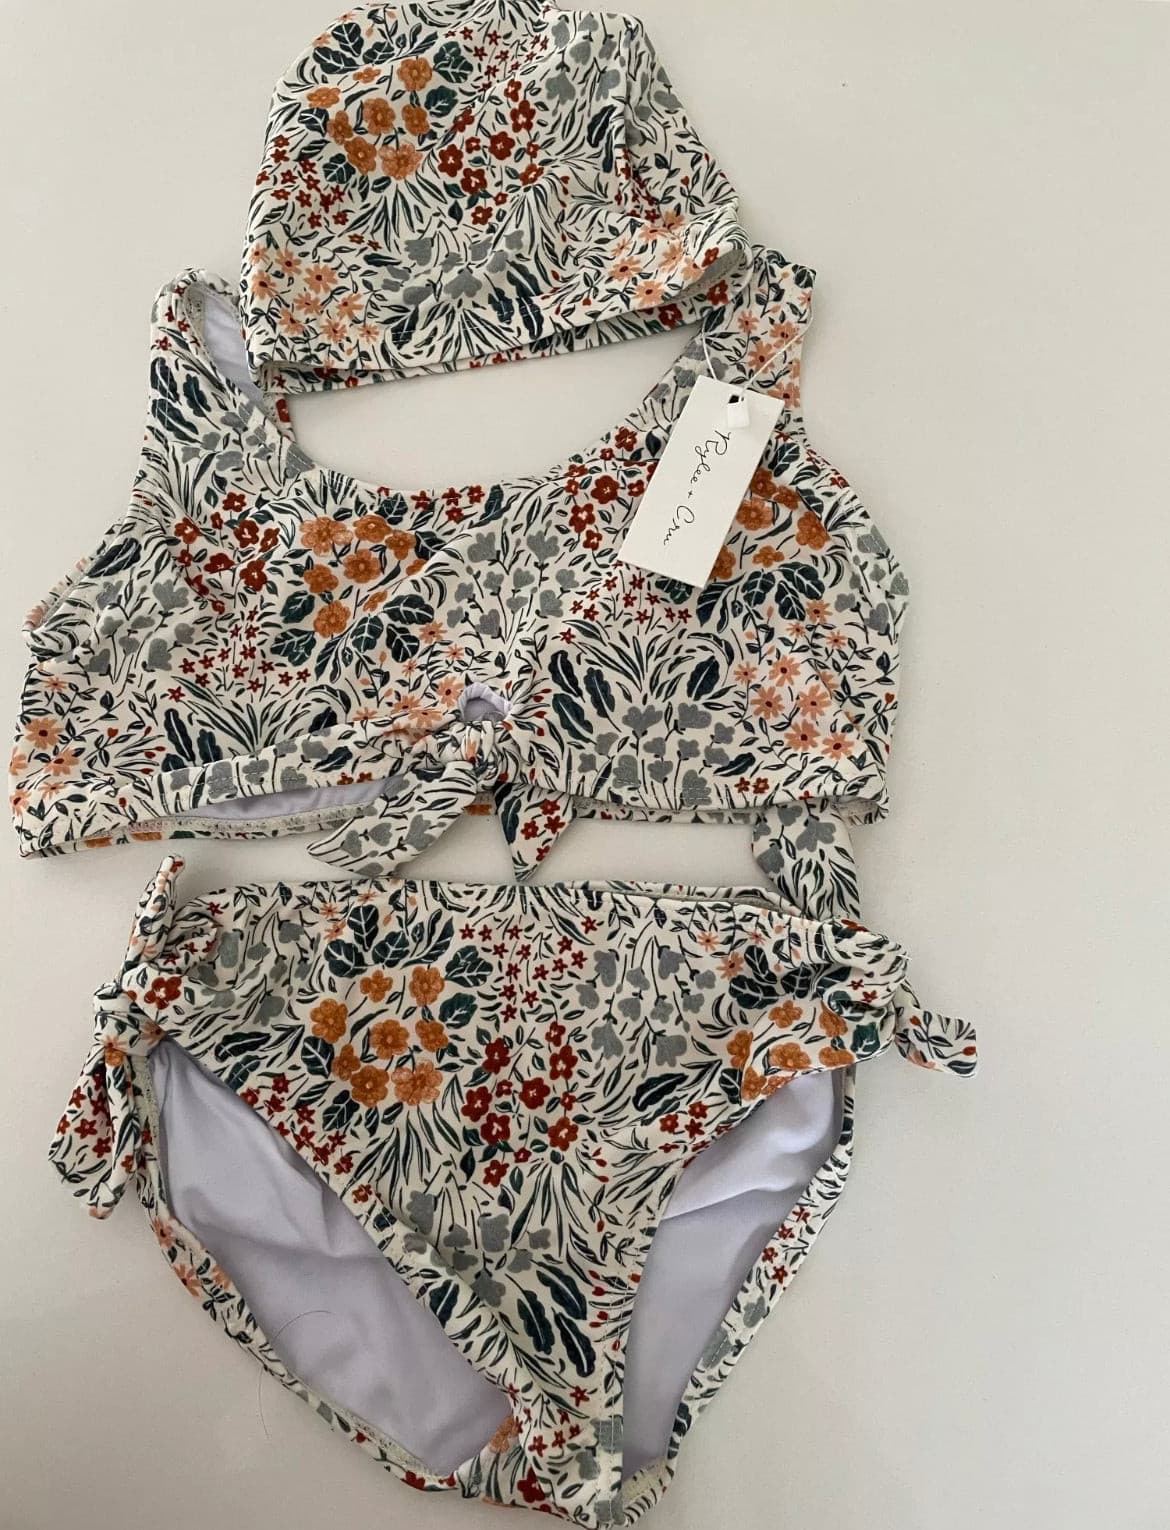 Toddler Girls Swimsuit Bikini , Blue Florals, from 12 months-12 years.